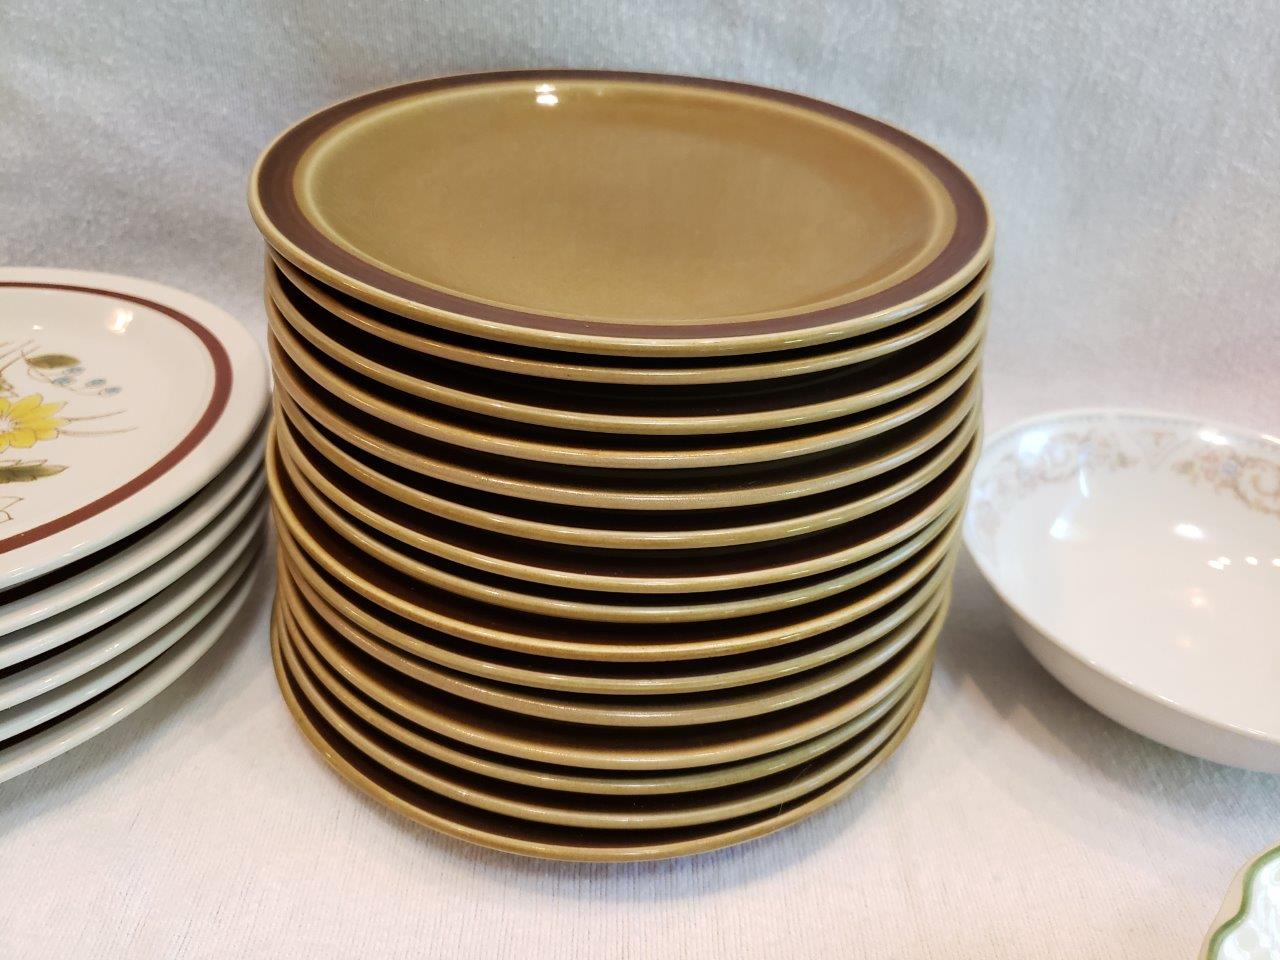 Plates and dishes (china ceramic porcelain) cheap